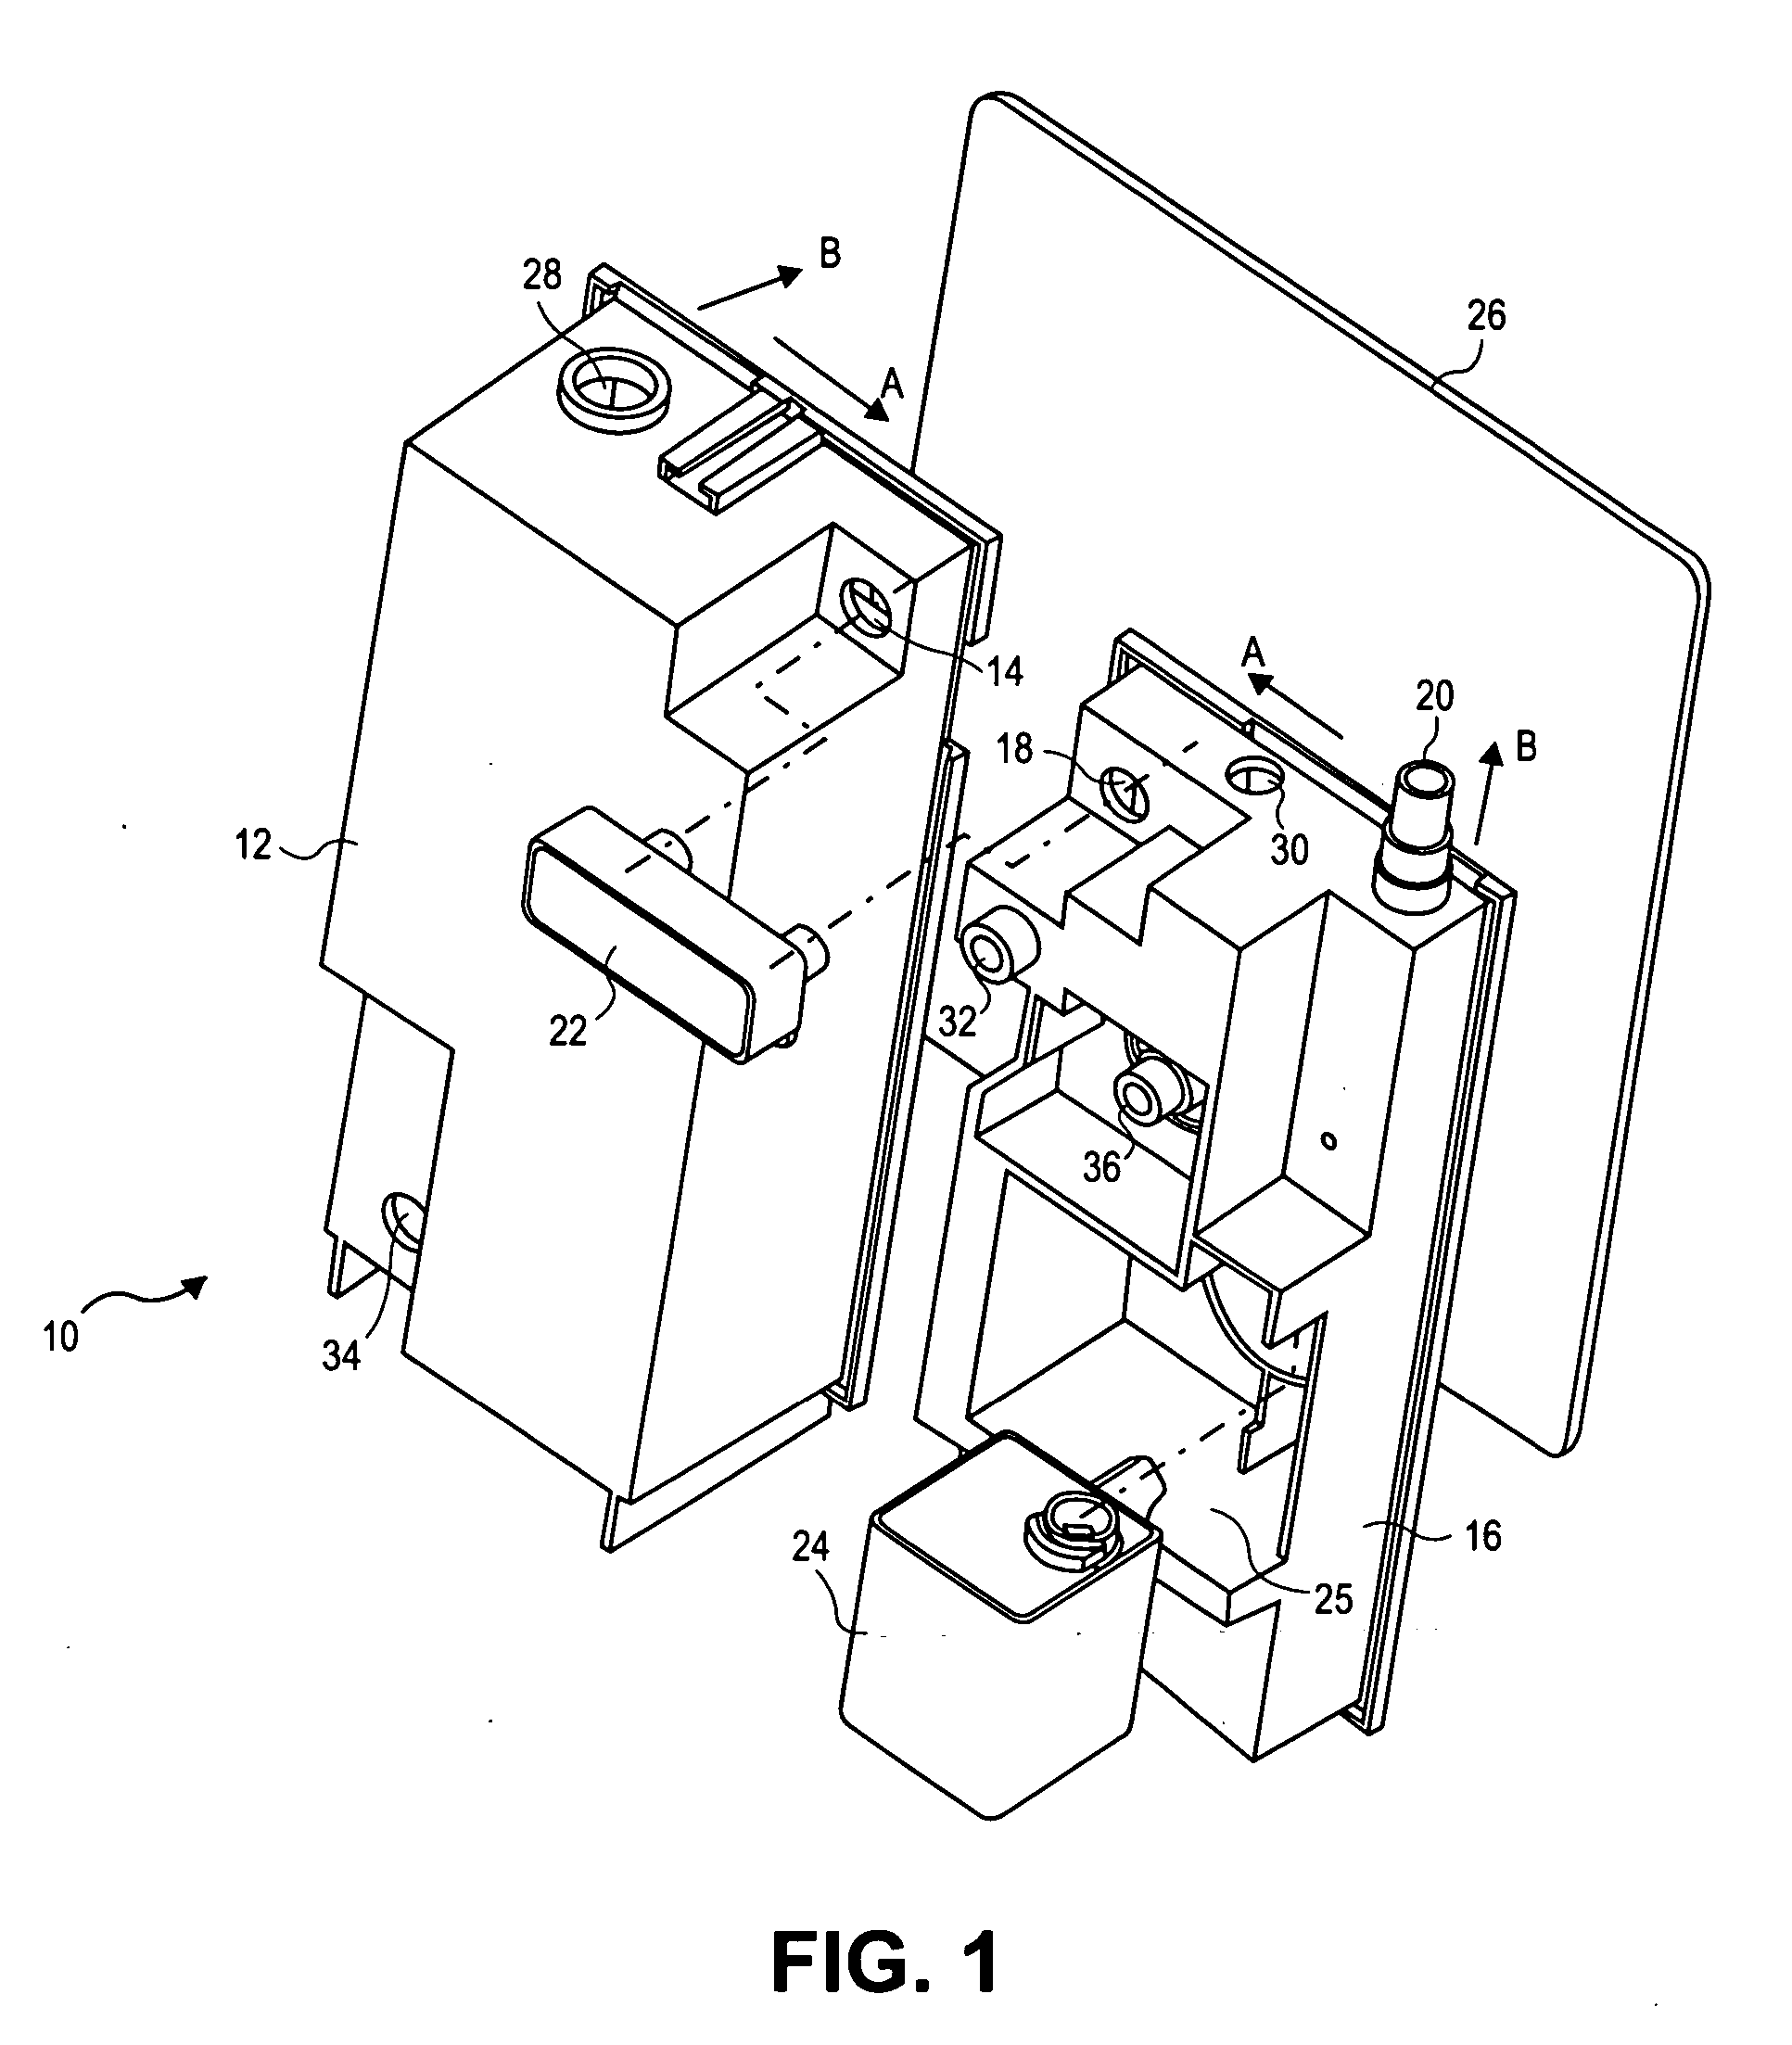 Modular chest drainage design and assembly method